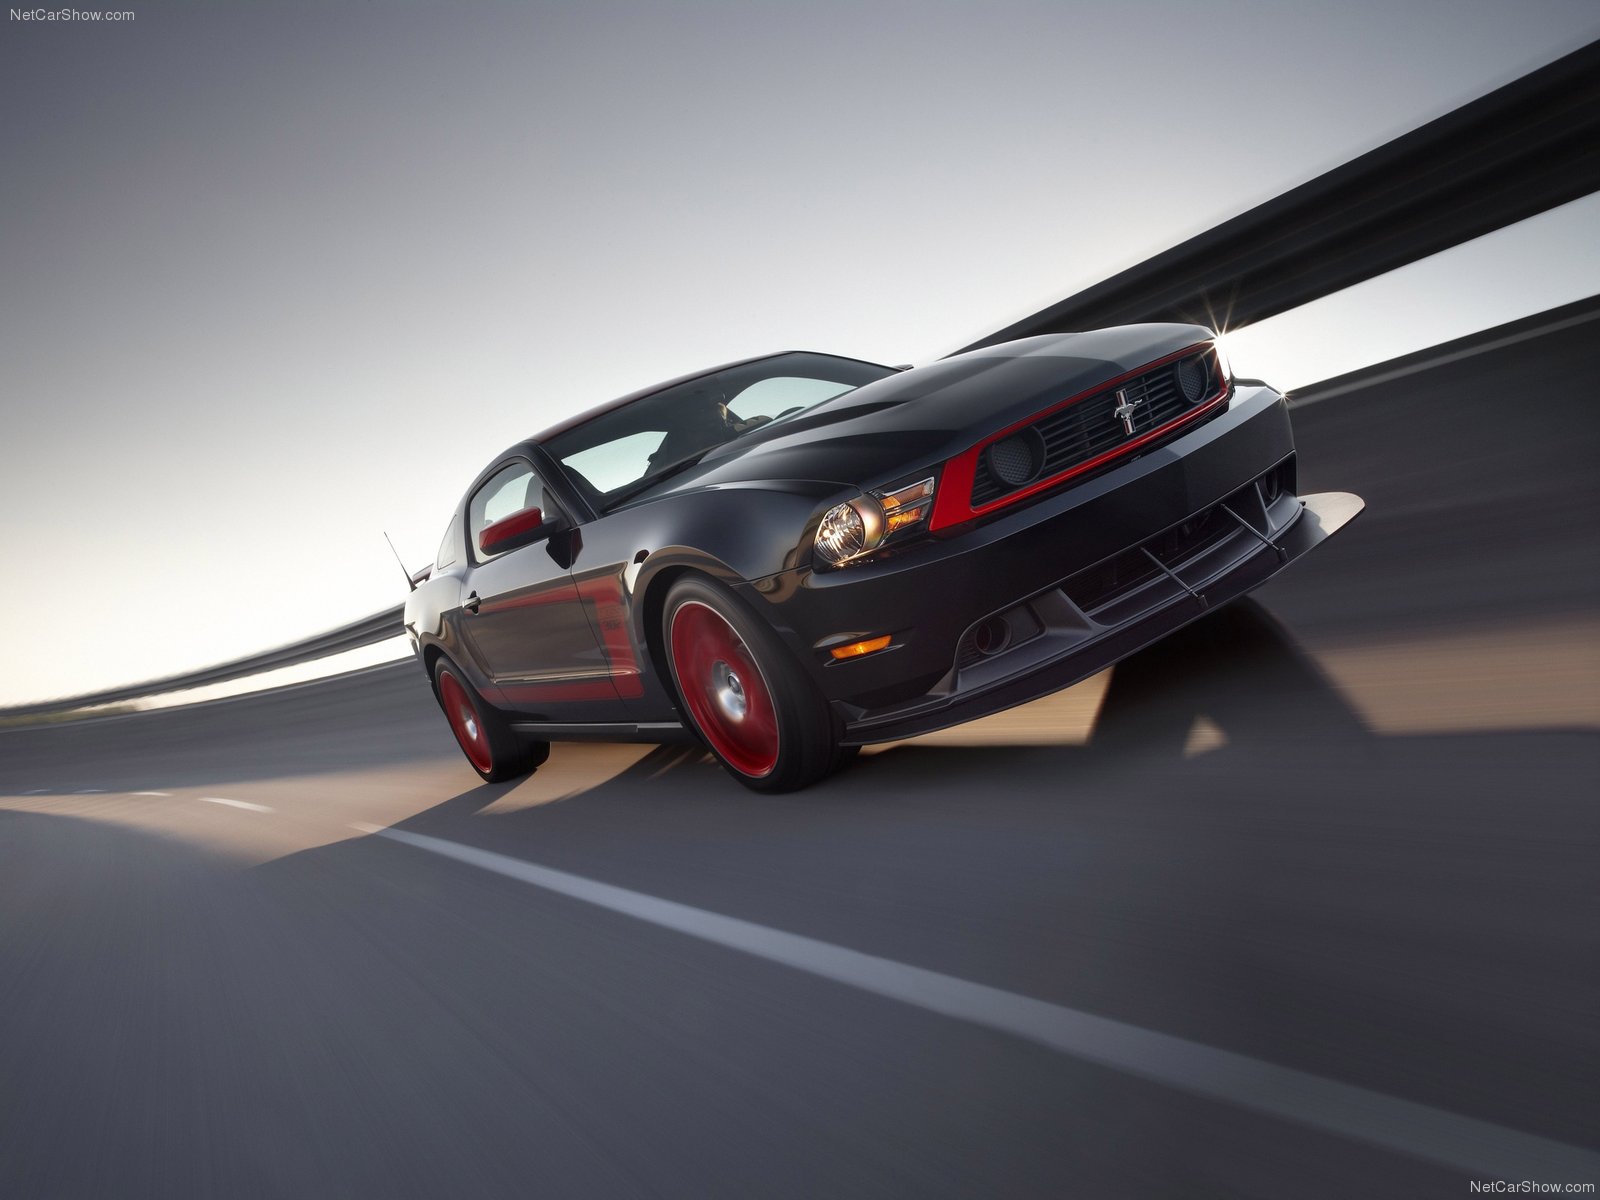 Ford Mustang Boss 302 Laguna Seca - High-performance vehicle by Ford.